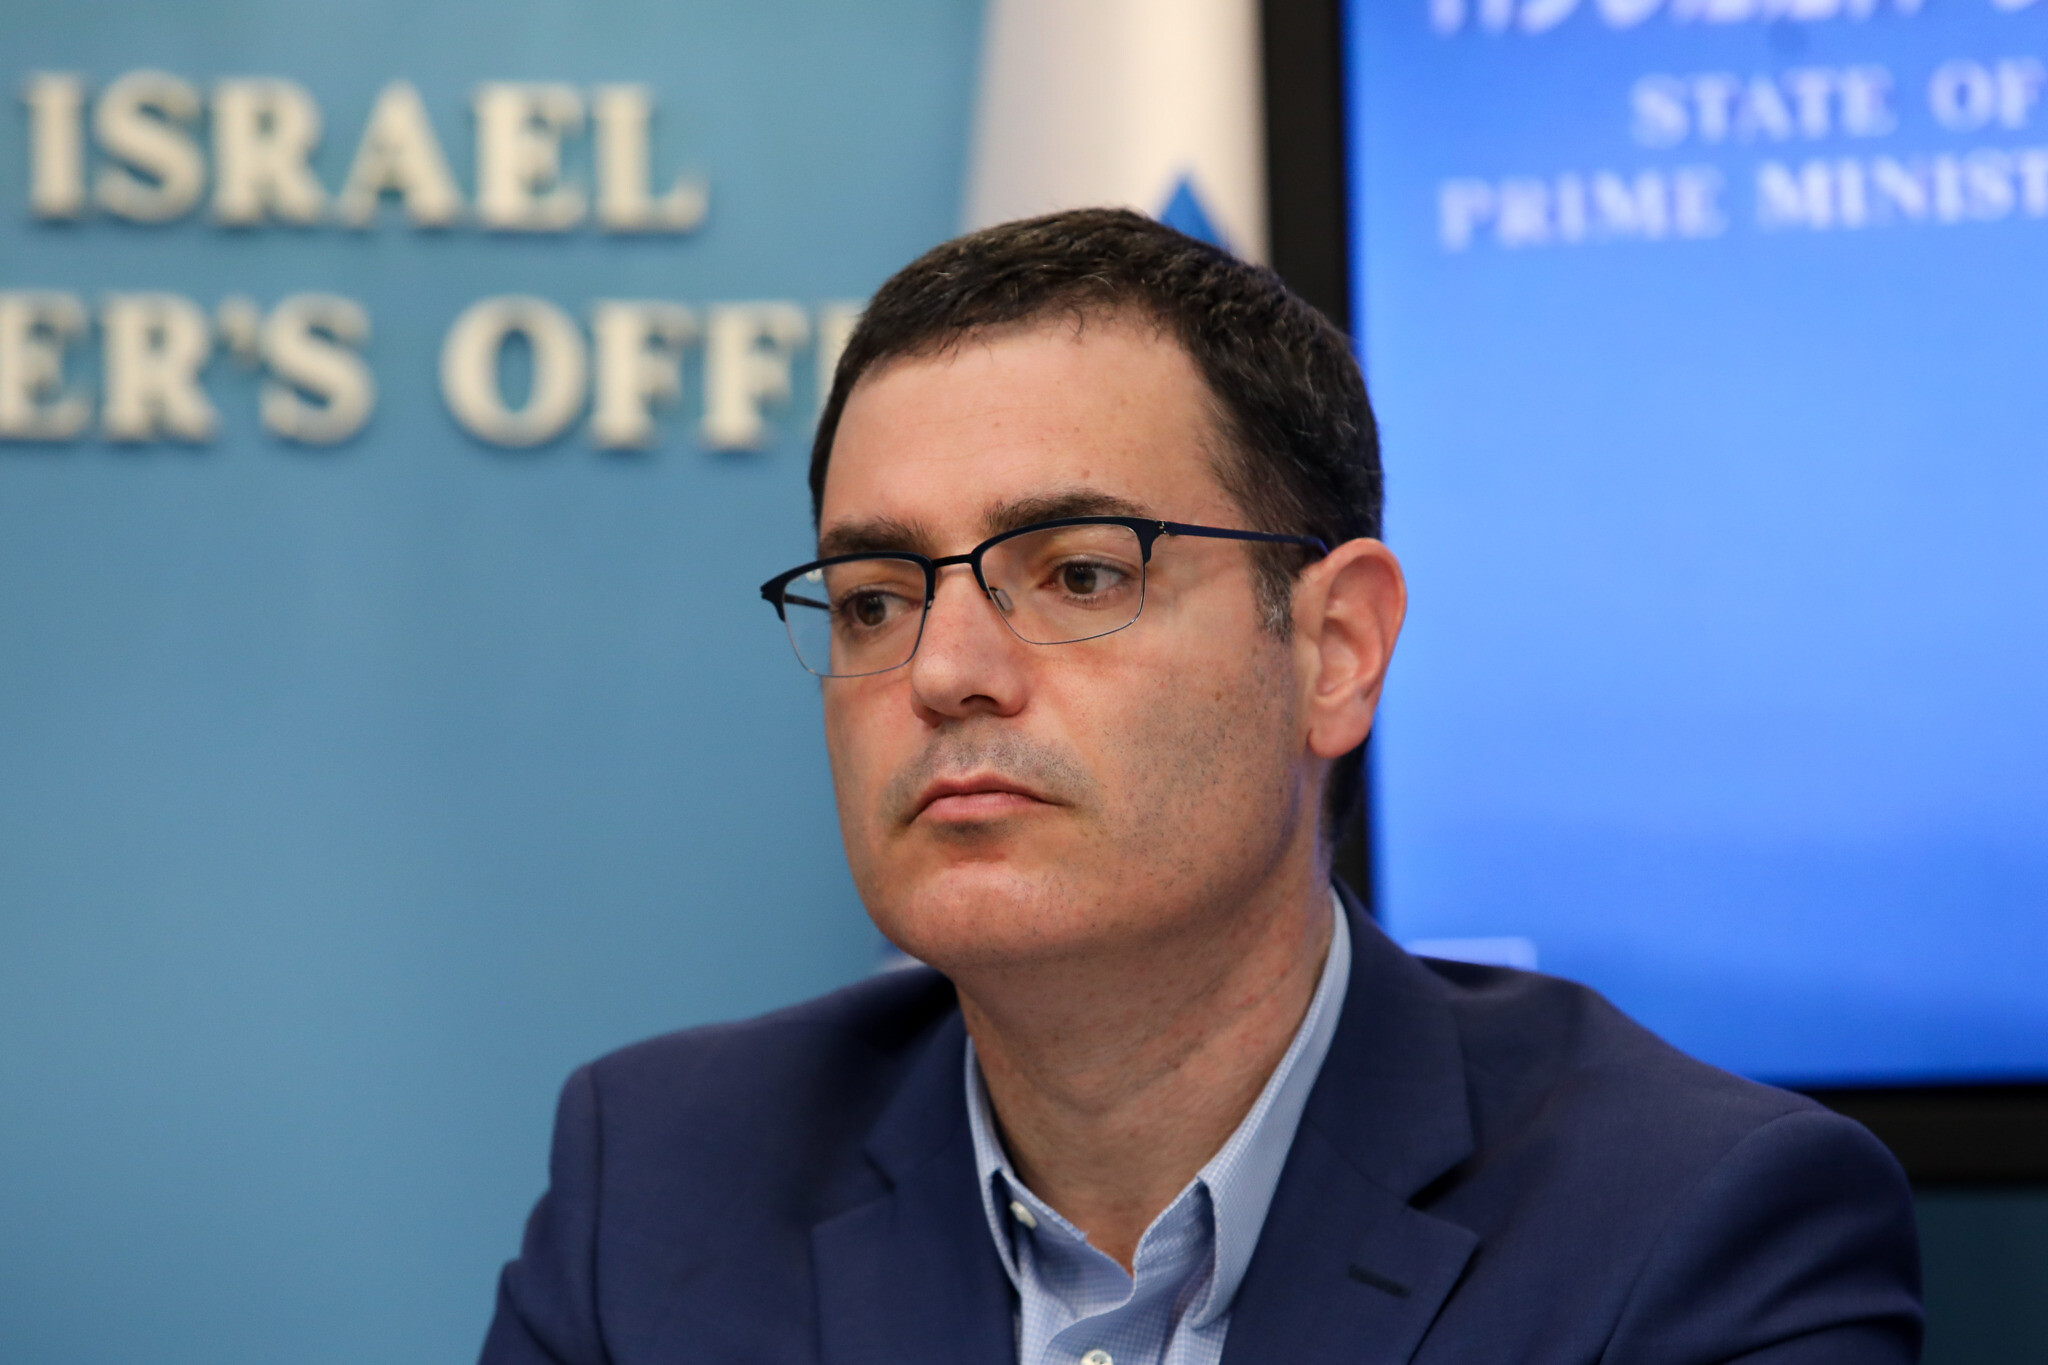 Health Ministry Director-General Moshe Bar Siman-Tov at a press conference at the Prime Minister’s Office in Jerusalem, March 11, 2020. (Flash90)